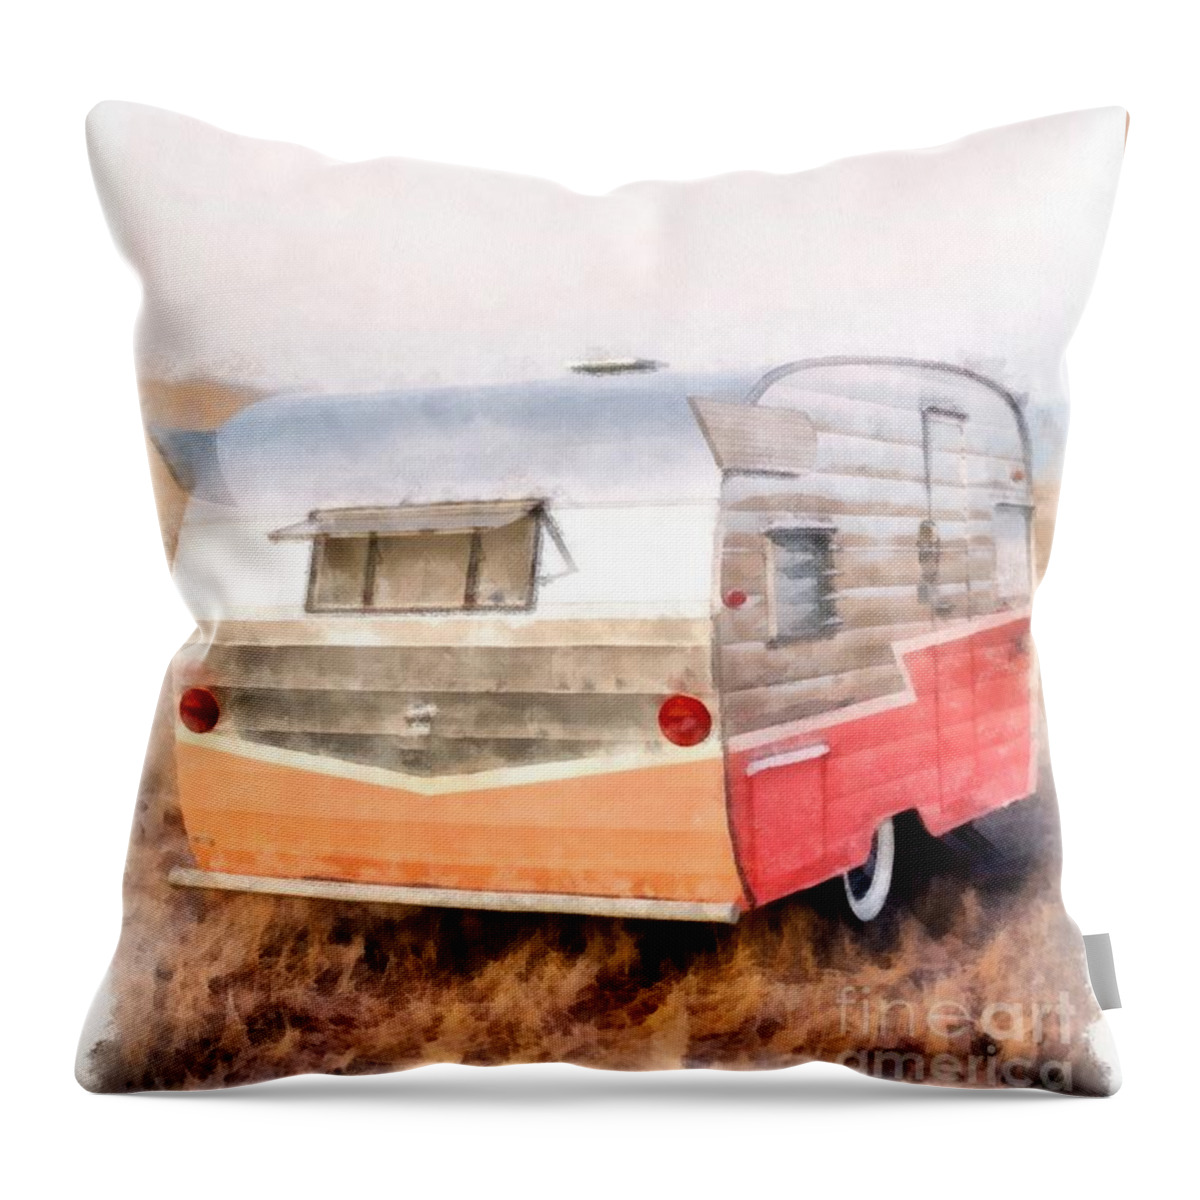 Glamping Throw Pillow featuring the digital art Let's Go Camping by Edward Fielding